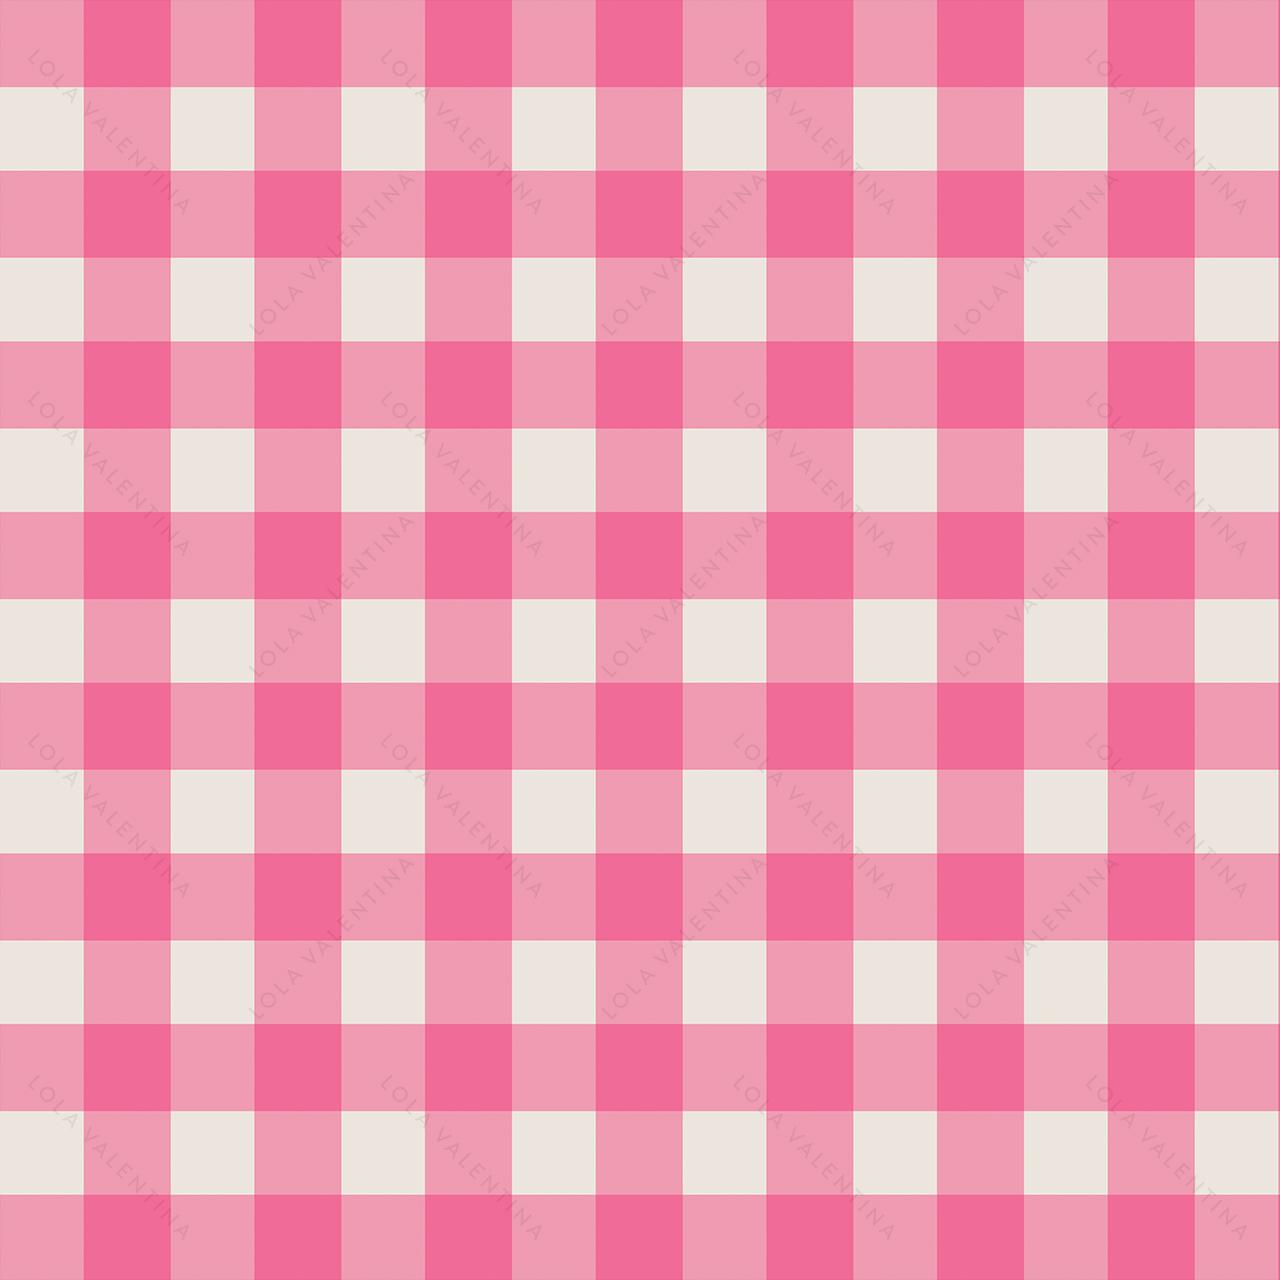 https://www.lolavalentina.com/wp-content/uploads/2022/04/Pink-Gingham-30x30-Scale-Watermarked.jpg